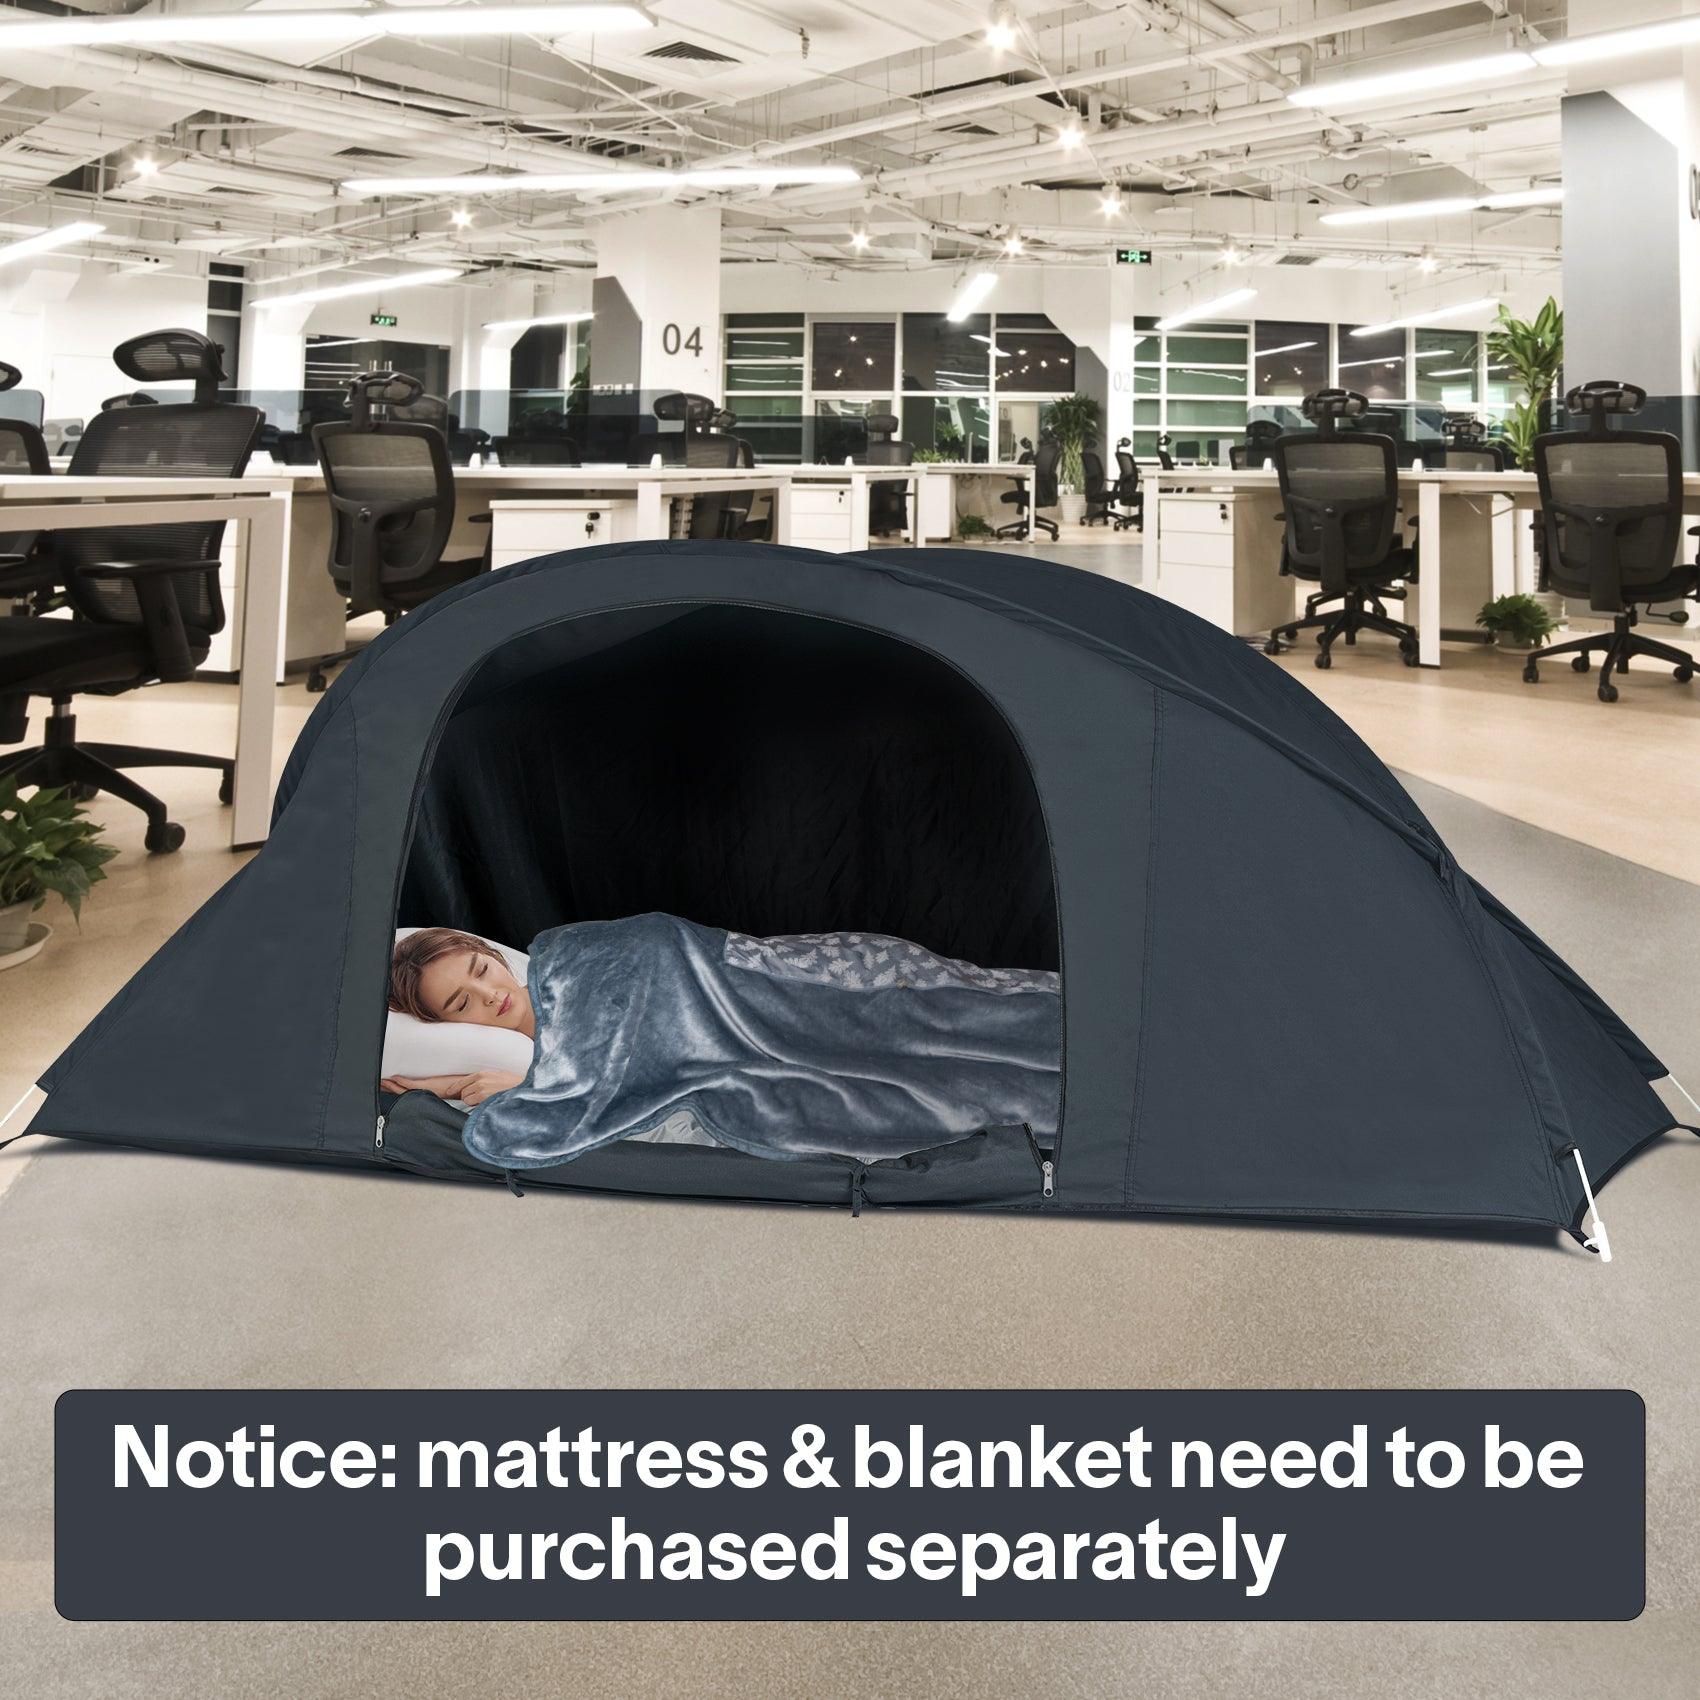 EighteenTek Pop Up Bed Canopy Office Sleeping Bed Tents One Person Privacy Space Lay Down NOT Sitting Frame 87"x28"x33"H